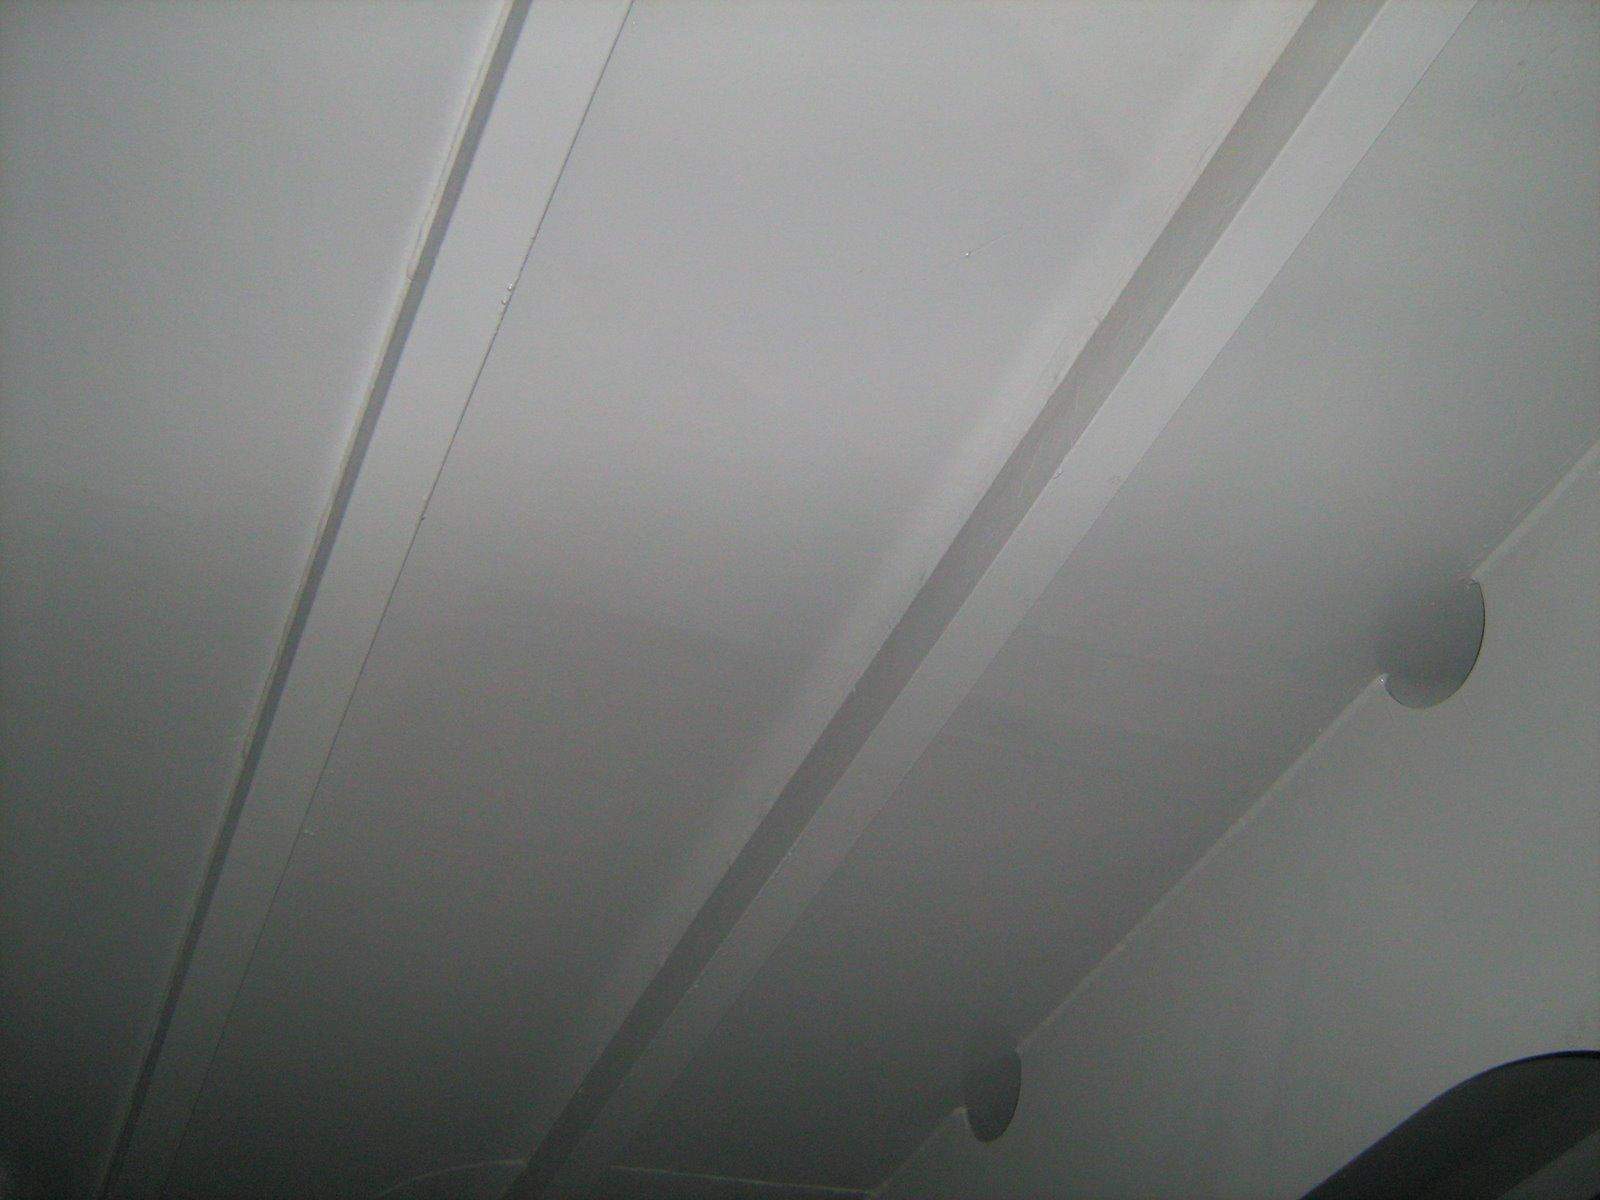 internal ballast tank roof and wall painted grey